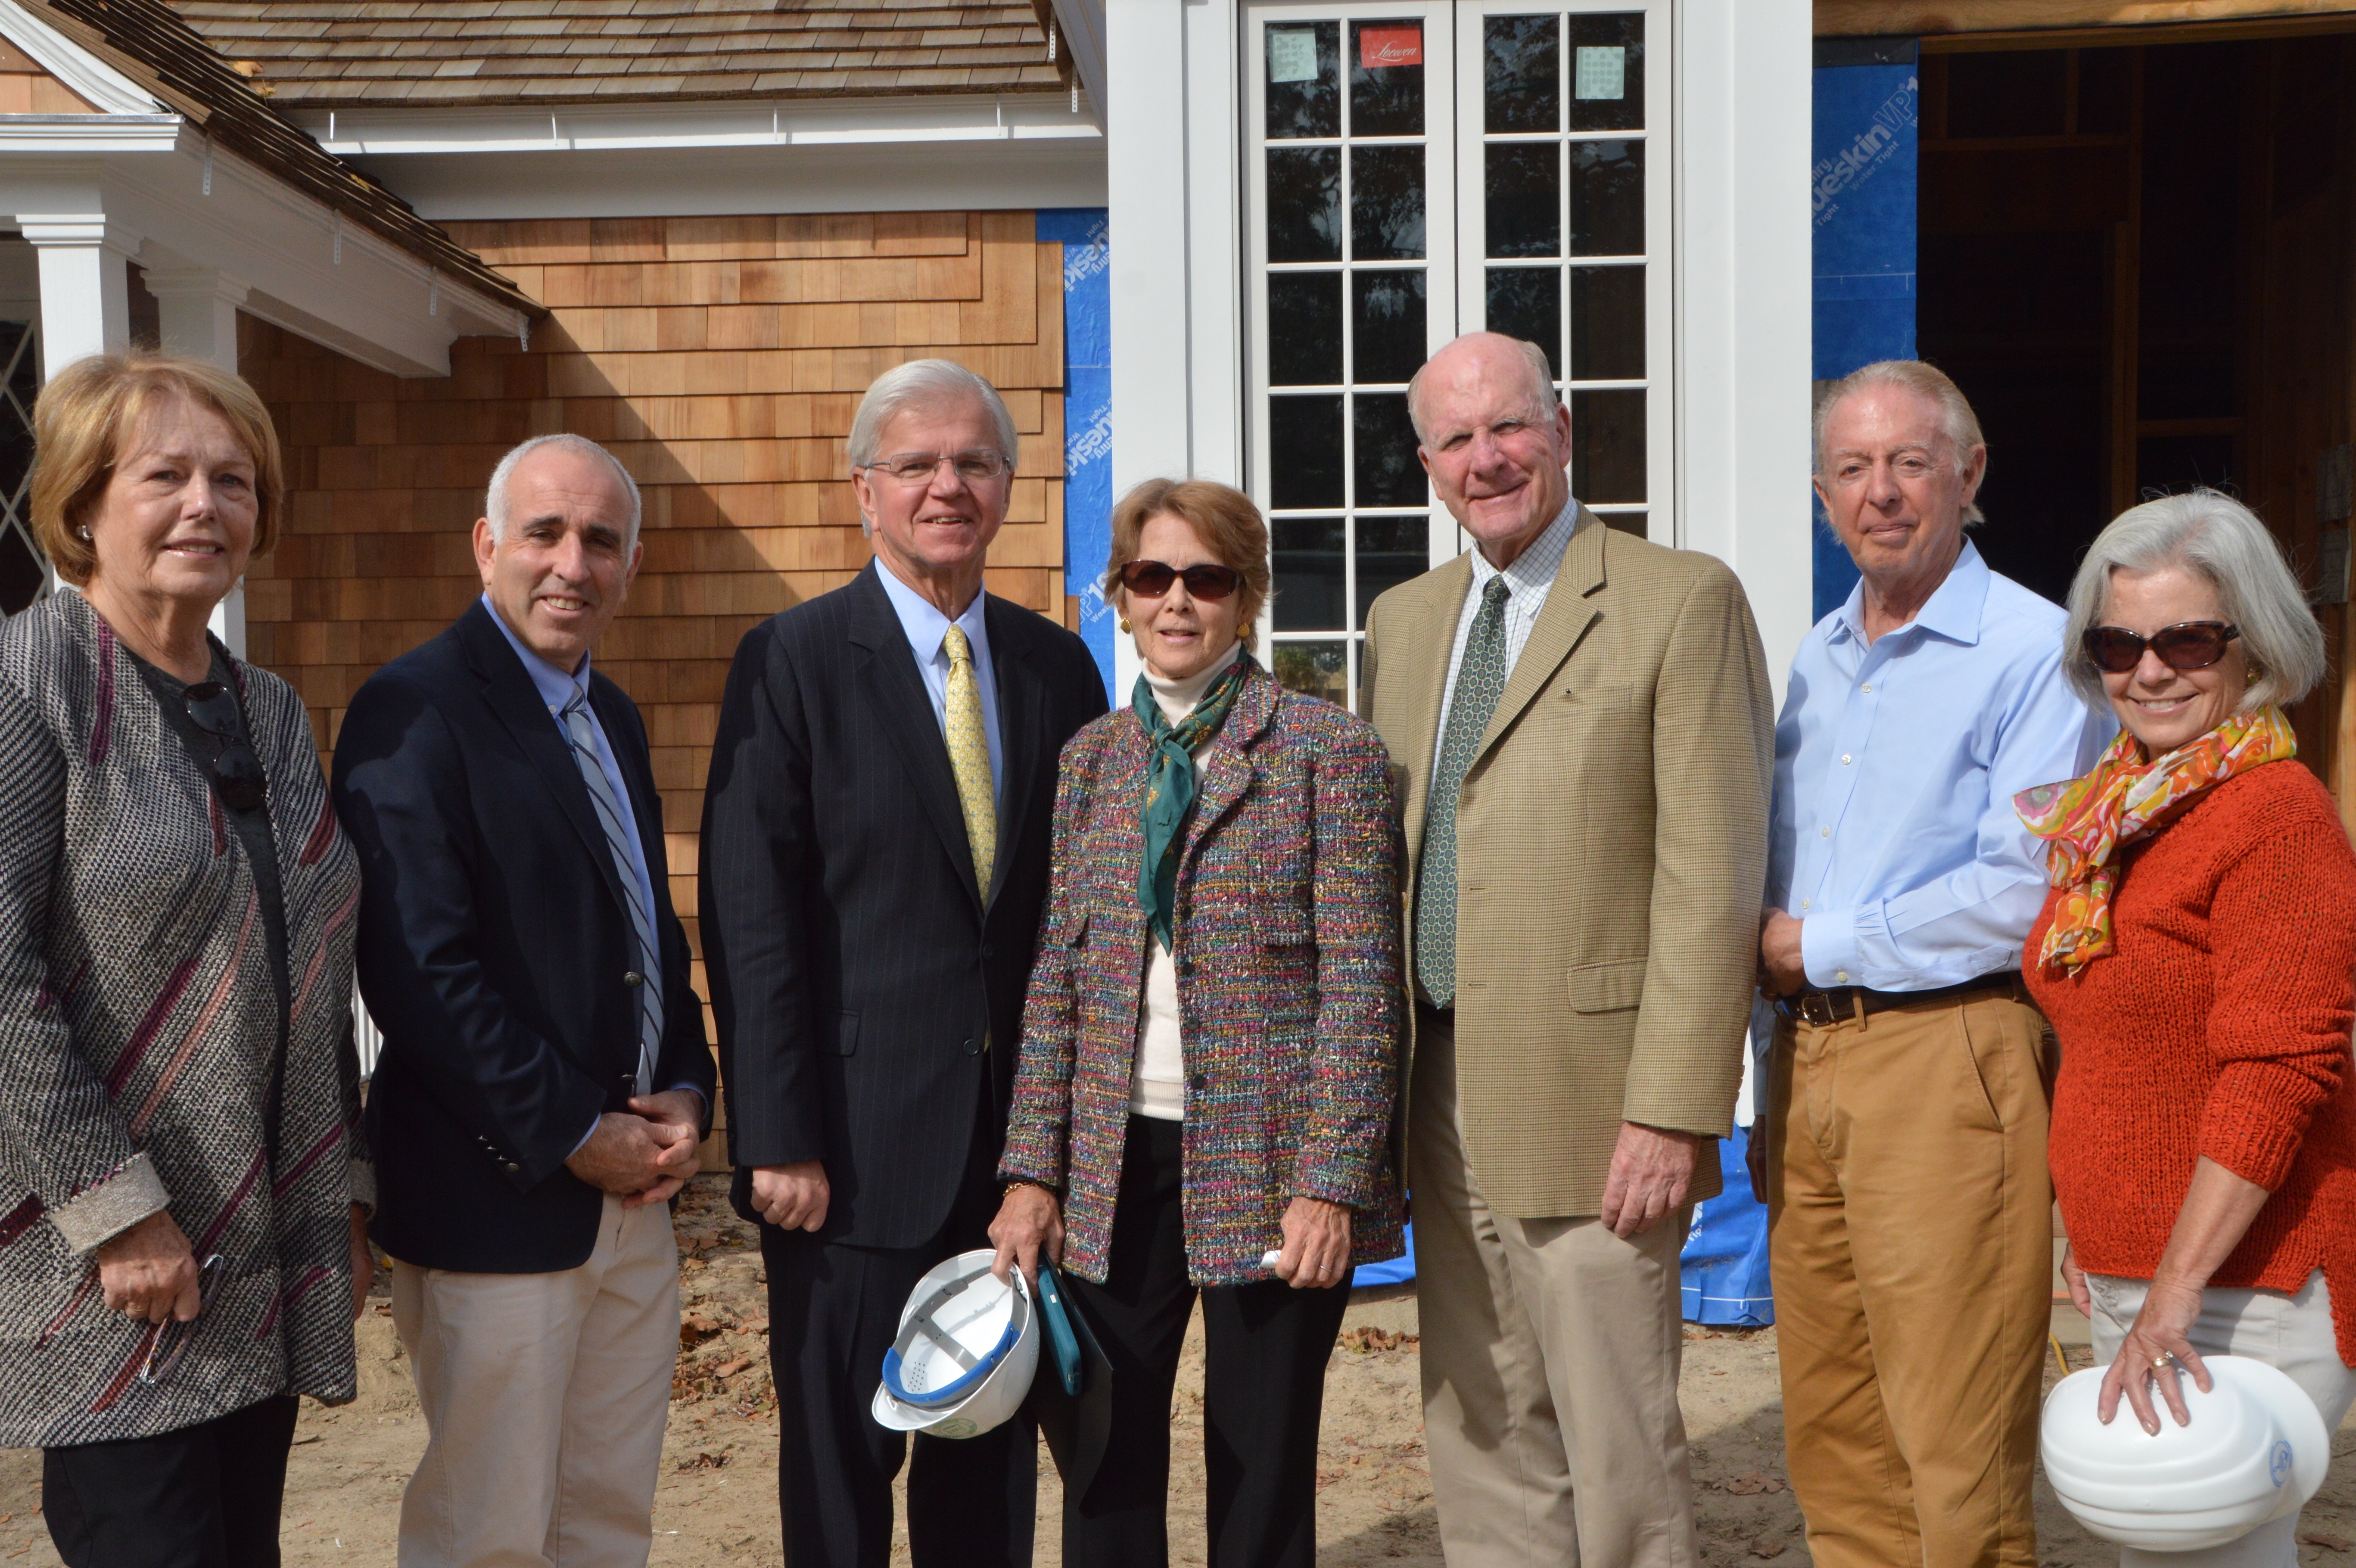 Local officials gathered recently to celebrat the halfway mark in the Quogue Library's renovation and expansion and the awarding of New York State construction grants to the project. From left, Quogue Library Building Committee representative Lynda Confessore, Southampton Town Supervisor Jay Schneiderman, New Yorks State Assemblyman Fred W. Thiele Jr., Quogue Libary Board and Building Committee President  Barbara Sartorius, Quogue Village Mayor Peter Sartorius and Paul Mejean and Sally McGrath, library trustees and members of the Building Committee.